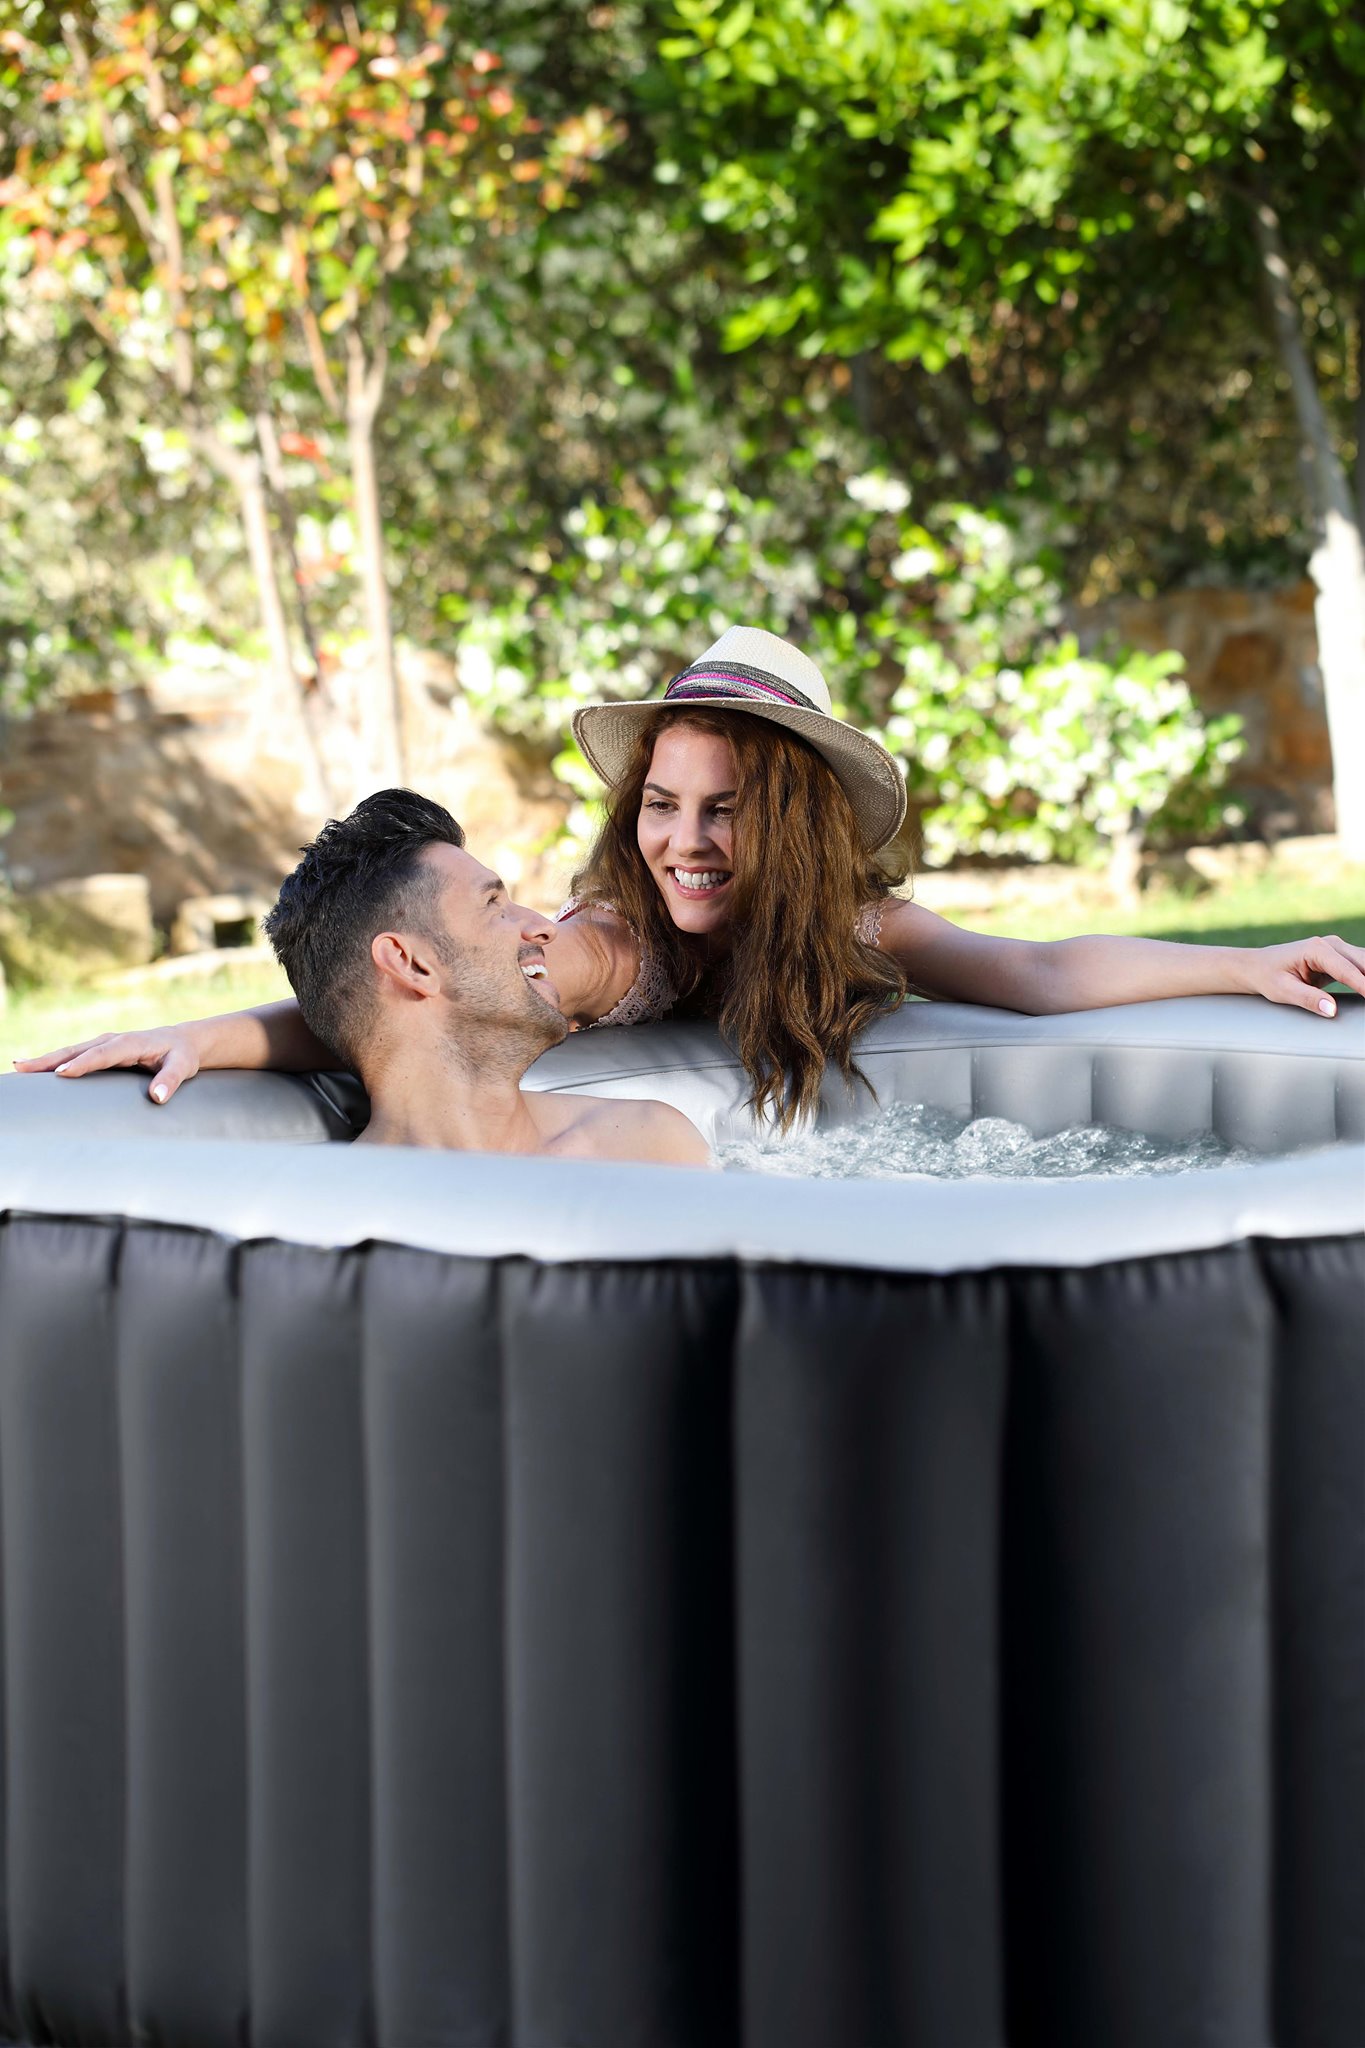 The MSpa Alpine inflatable hot tub for only €499 
 Relax your body, calm your mind and lift your spirits in a luxurious ... » Outdoor Furniture Fuengirola, Costa Del Sol, Spain